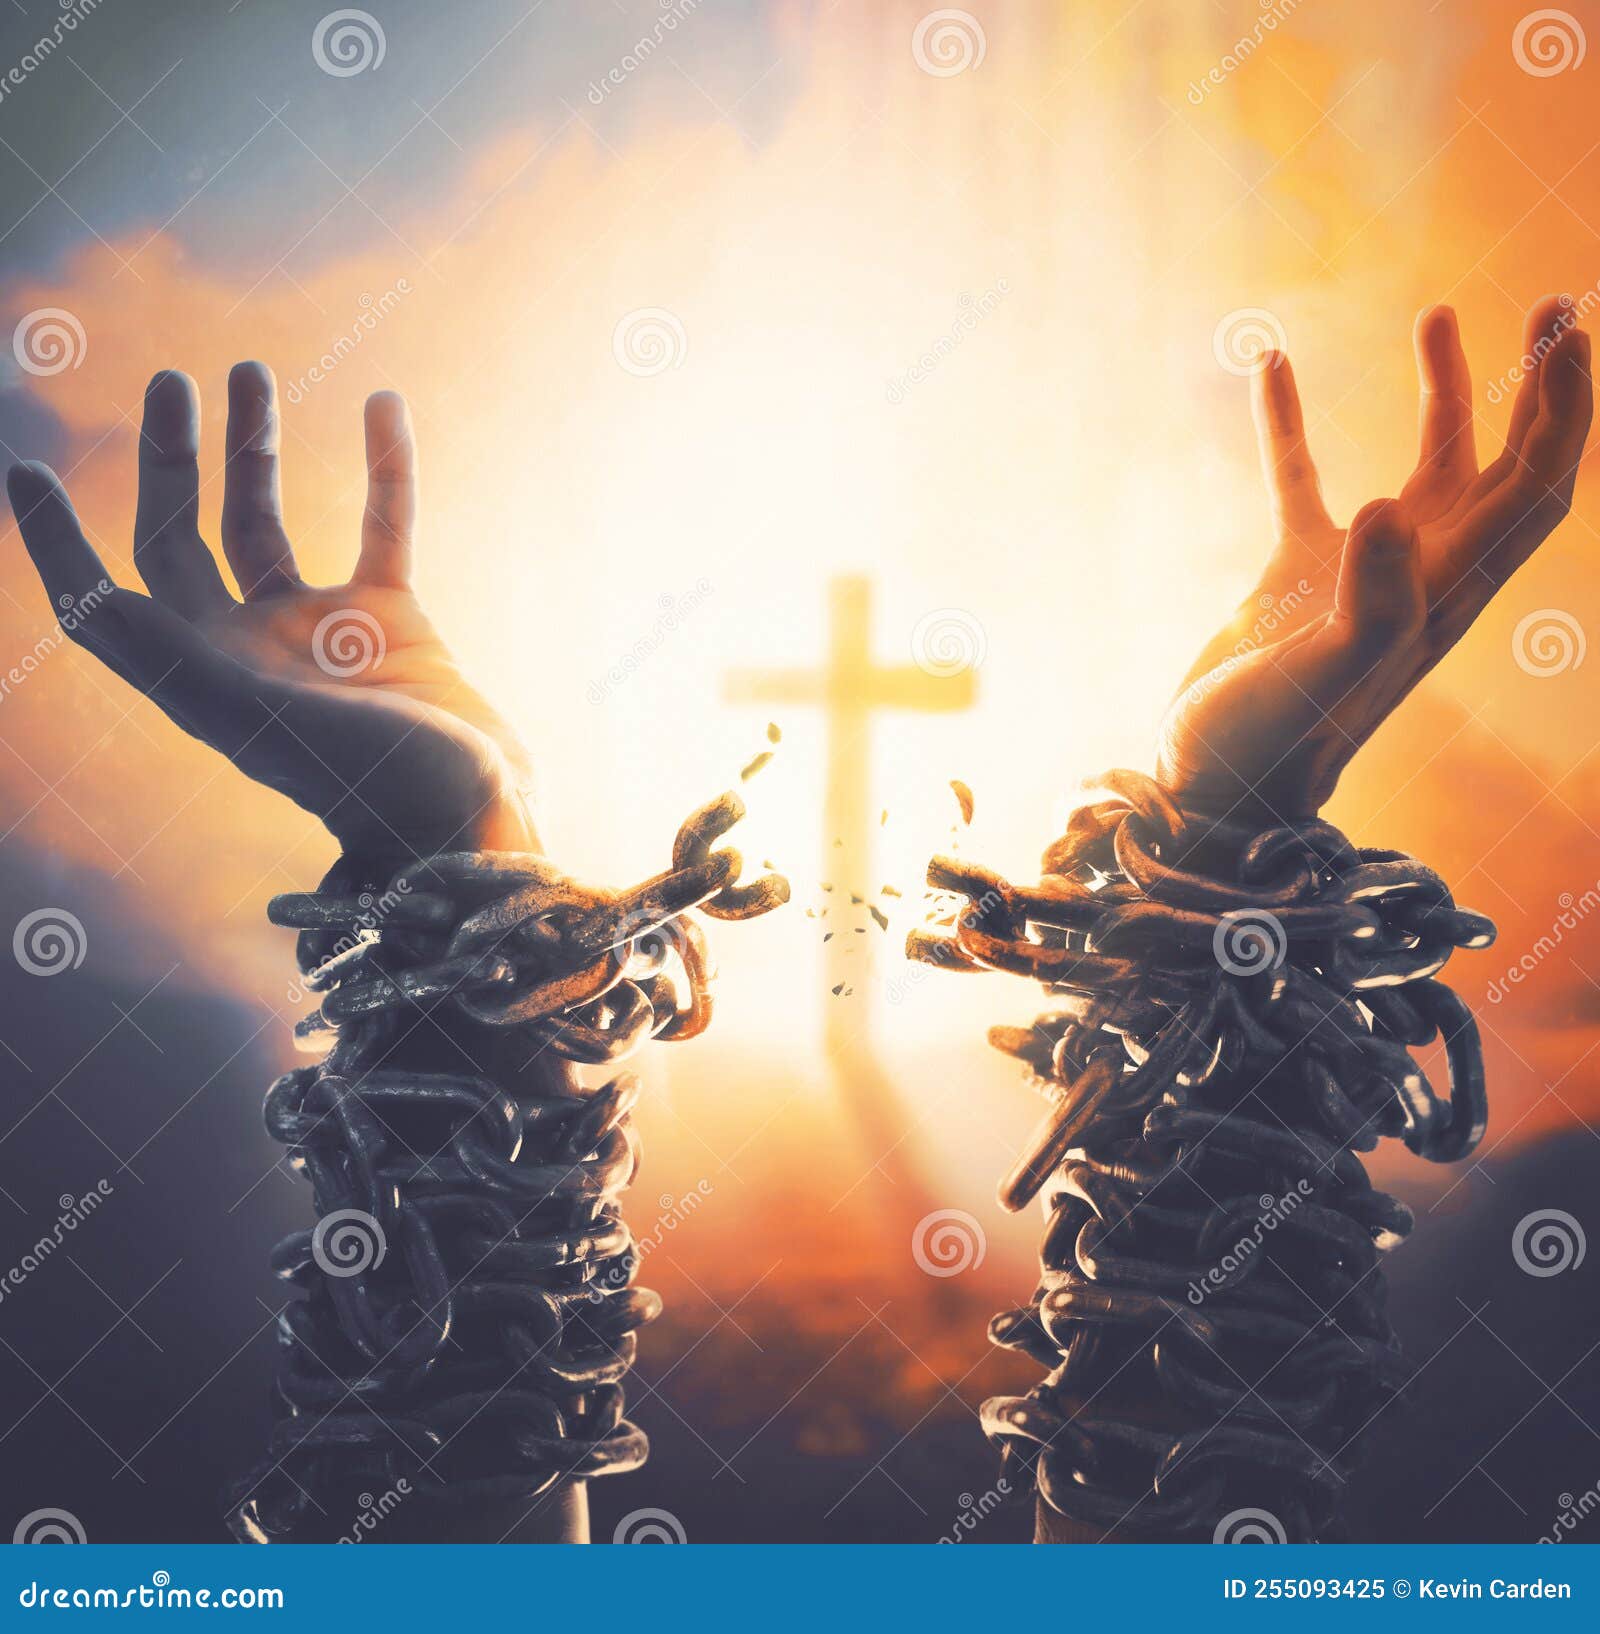 broken chains and cross